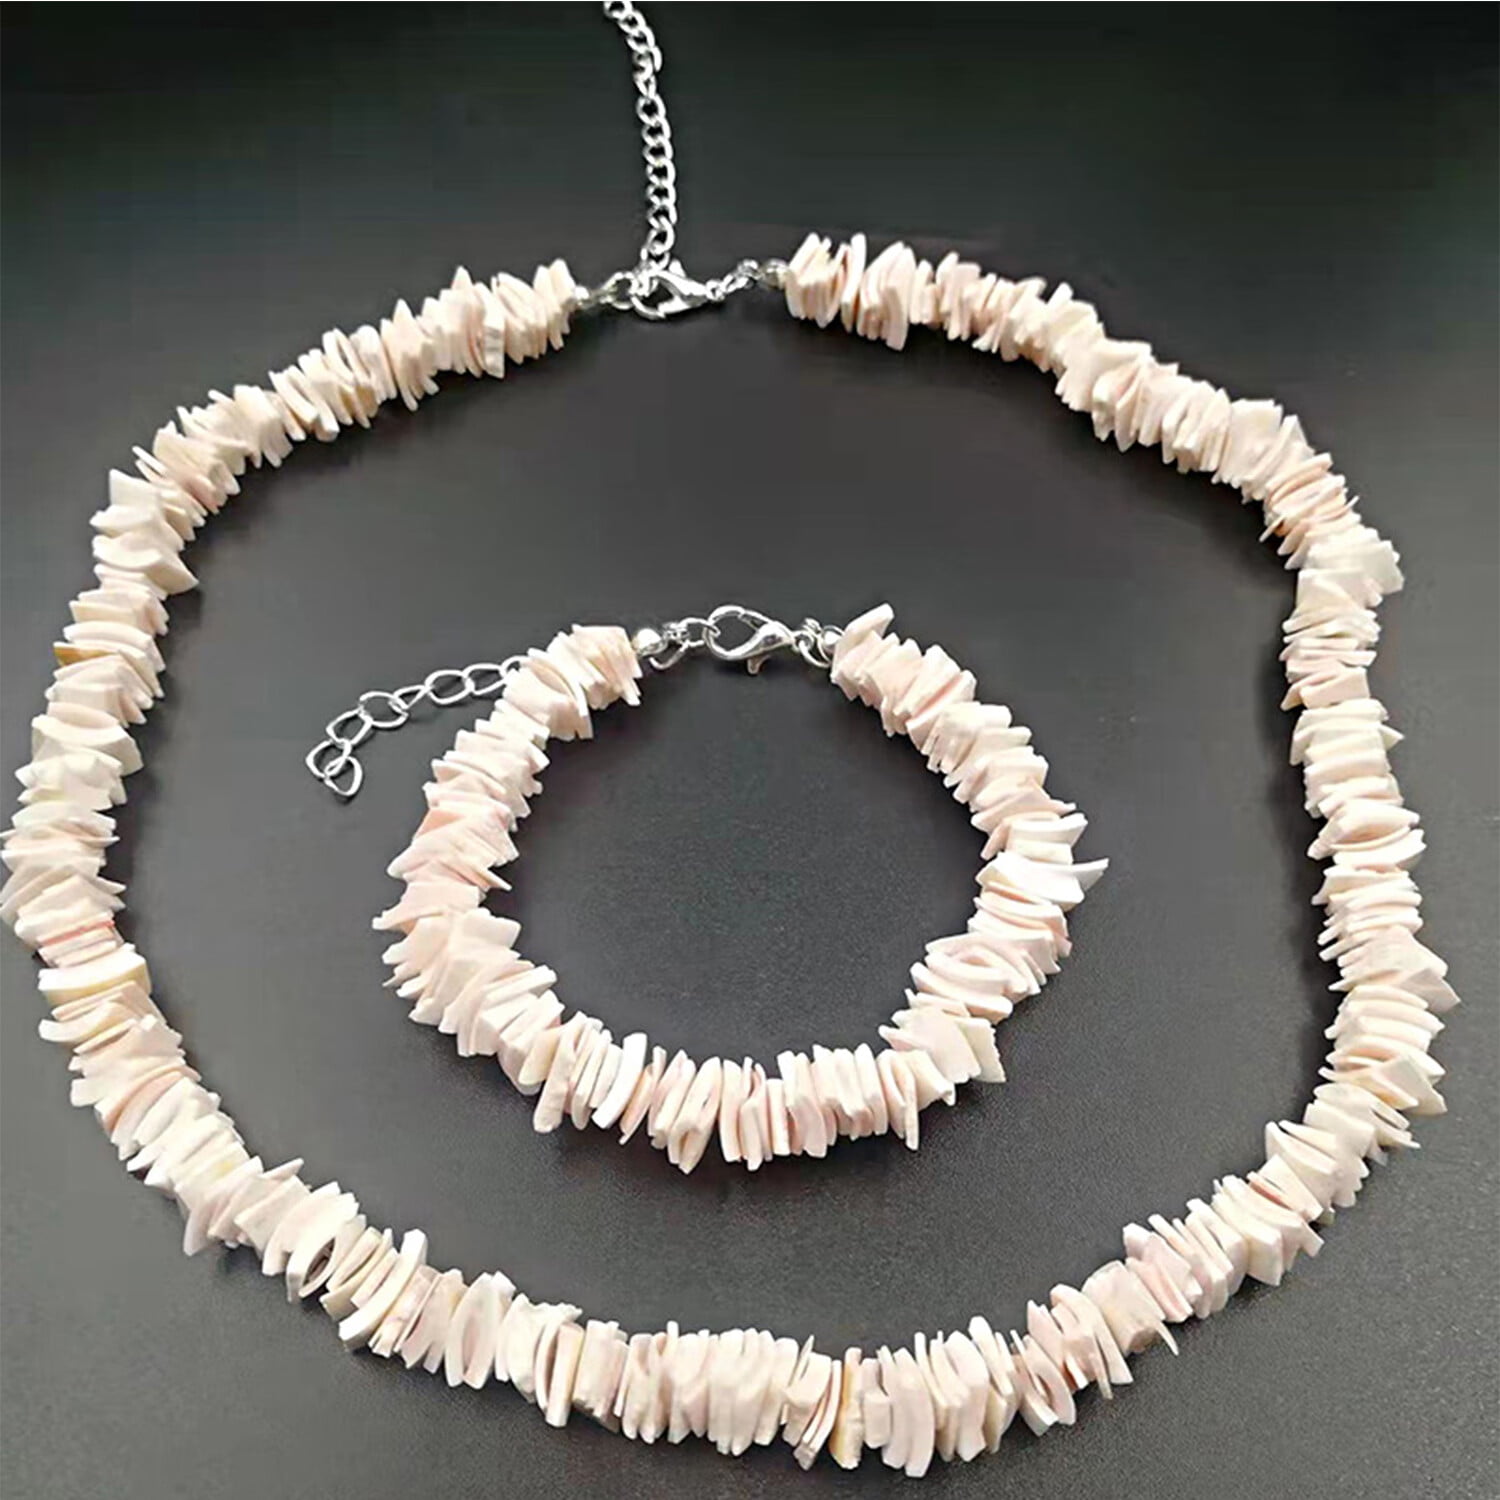 Details about   Hawaiian Jewelry Puka Shell and Black Coconut Bead Hawaii Necklace 